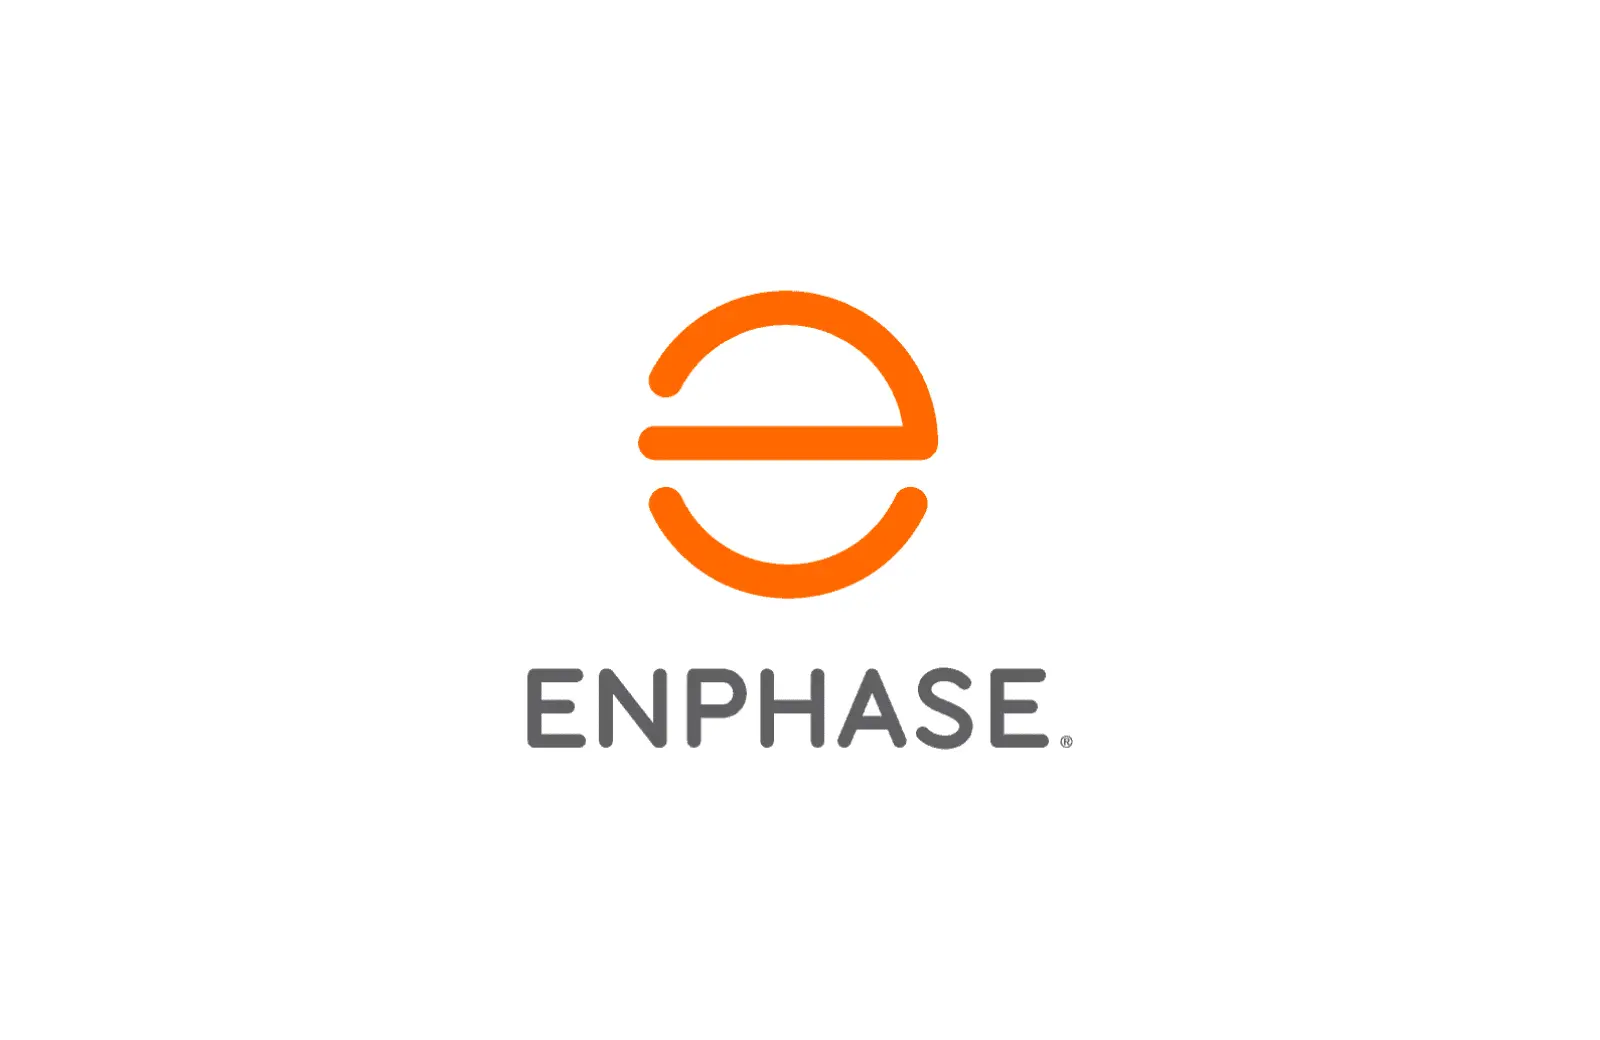 enphase solar panels - How much does Enphase solar cost